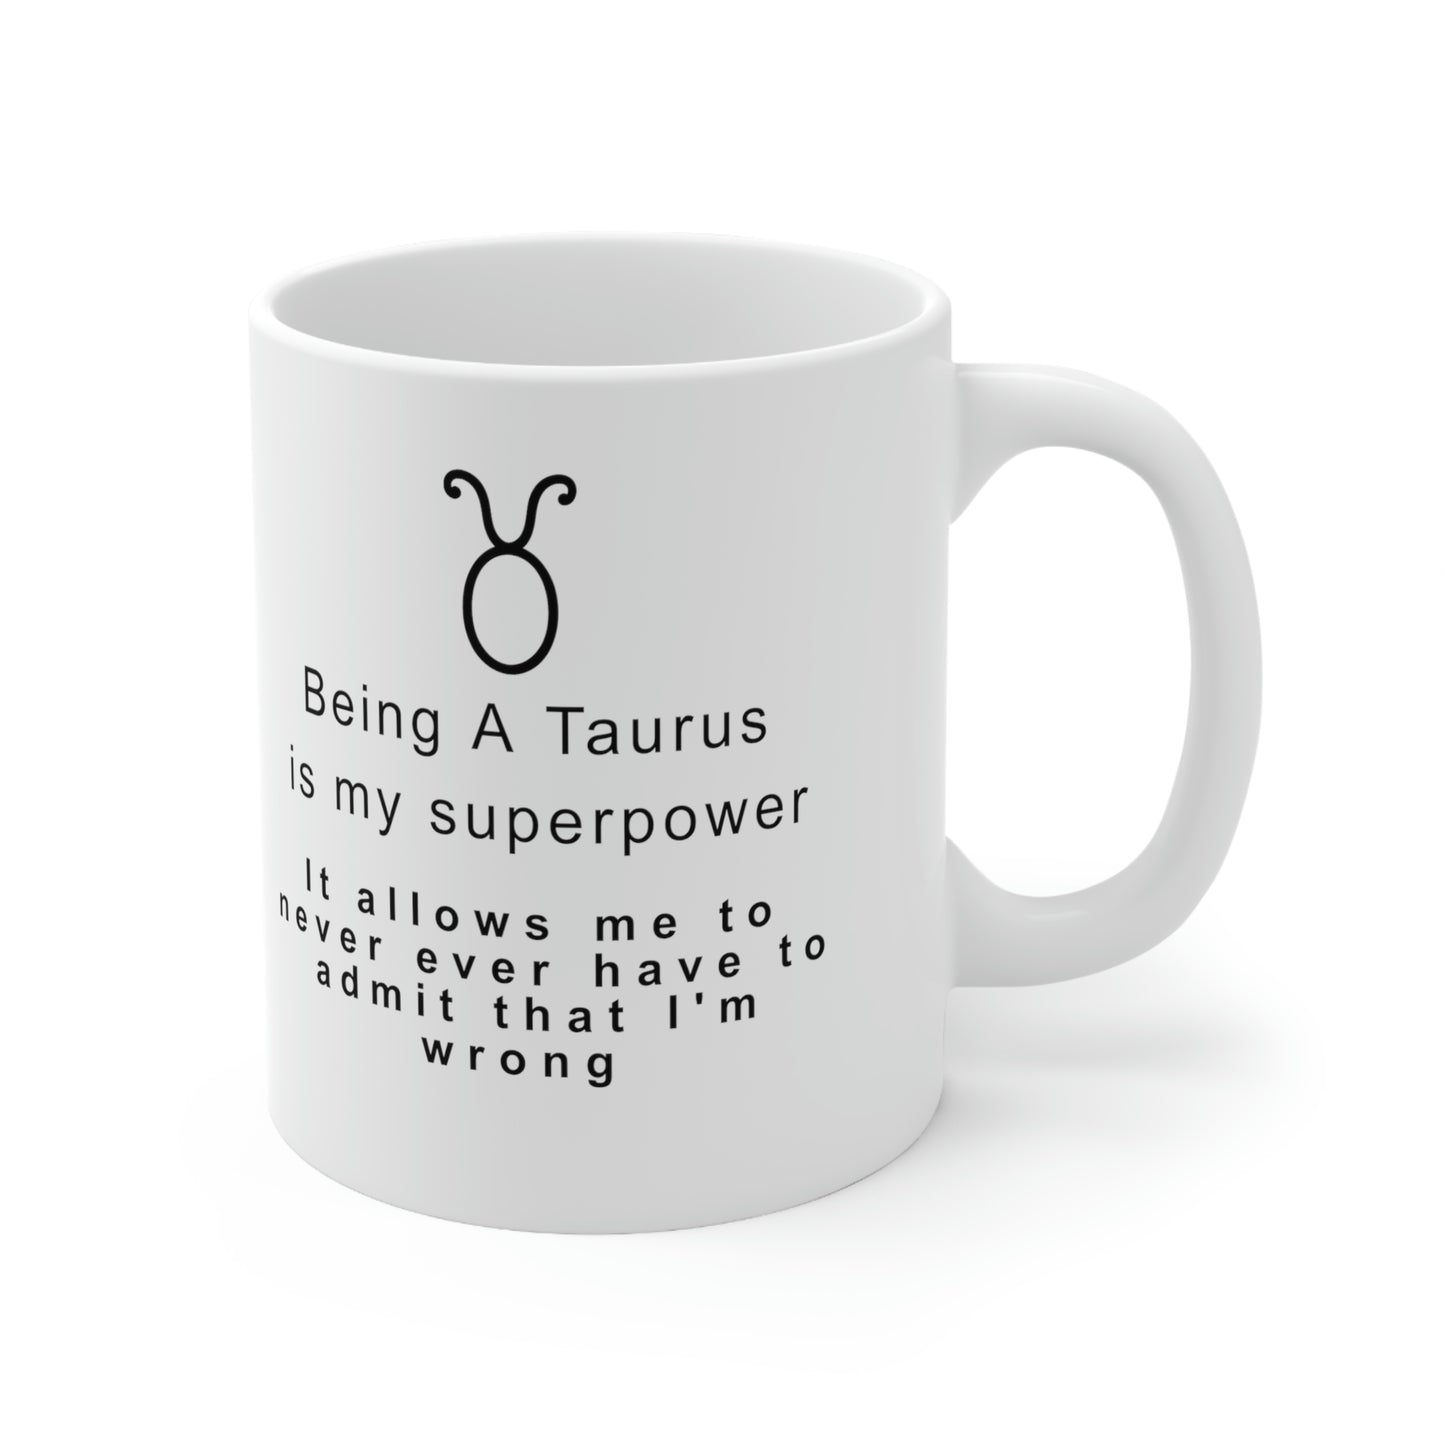 Taurus Mug: Being a Taurus is my superpower -It allows me to never ever have to admit that I'm wrong